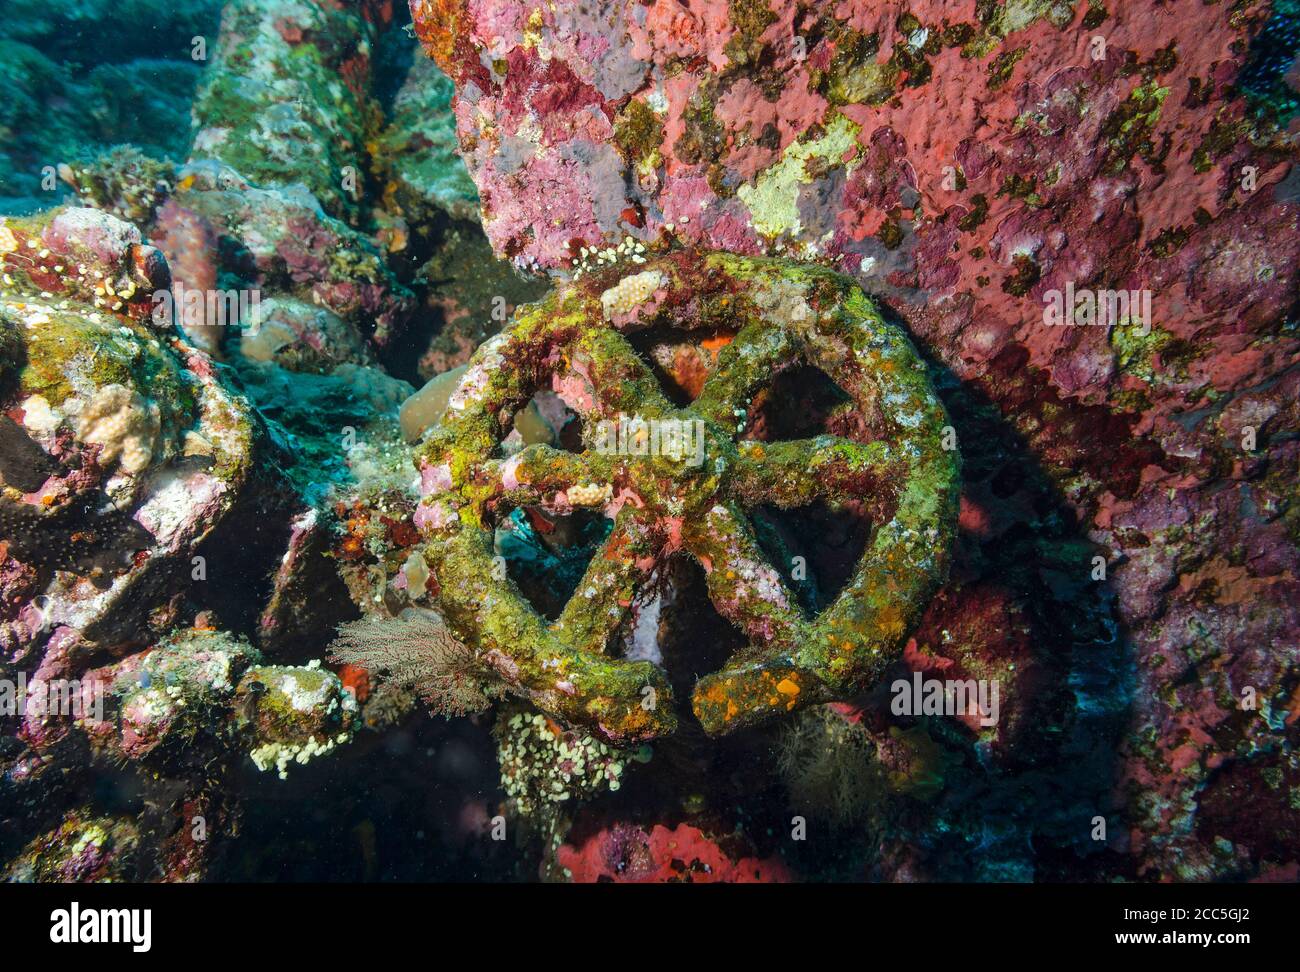 Detail of coral colonisation on Liberty wreck, Tulamben, Bali Stock Photo